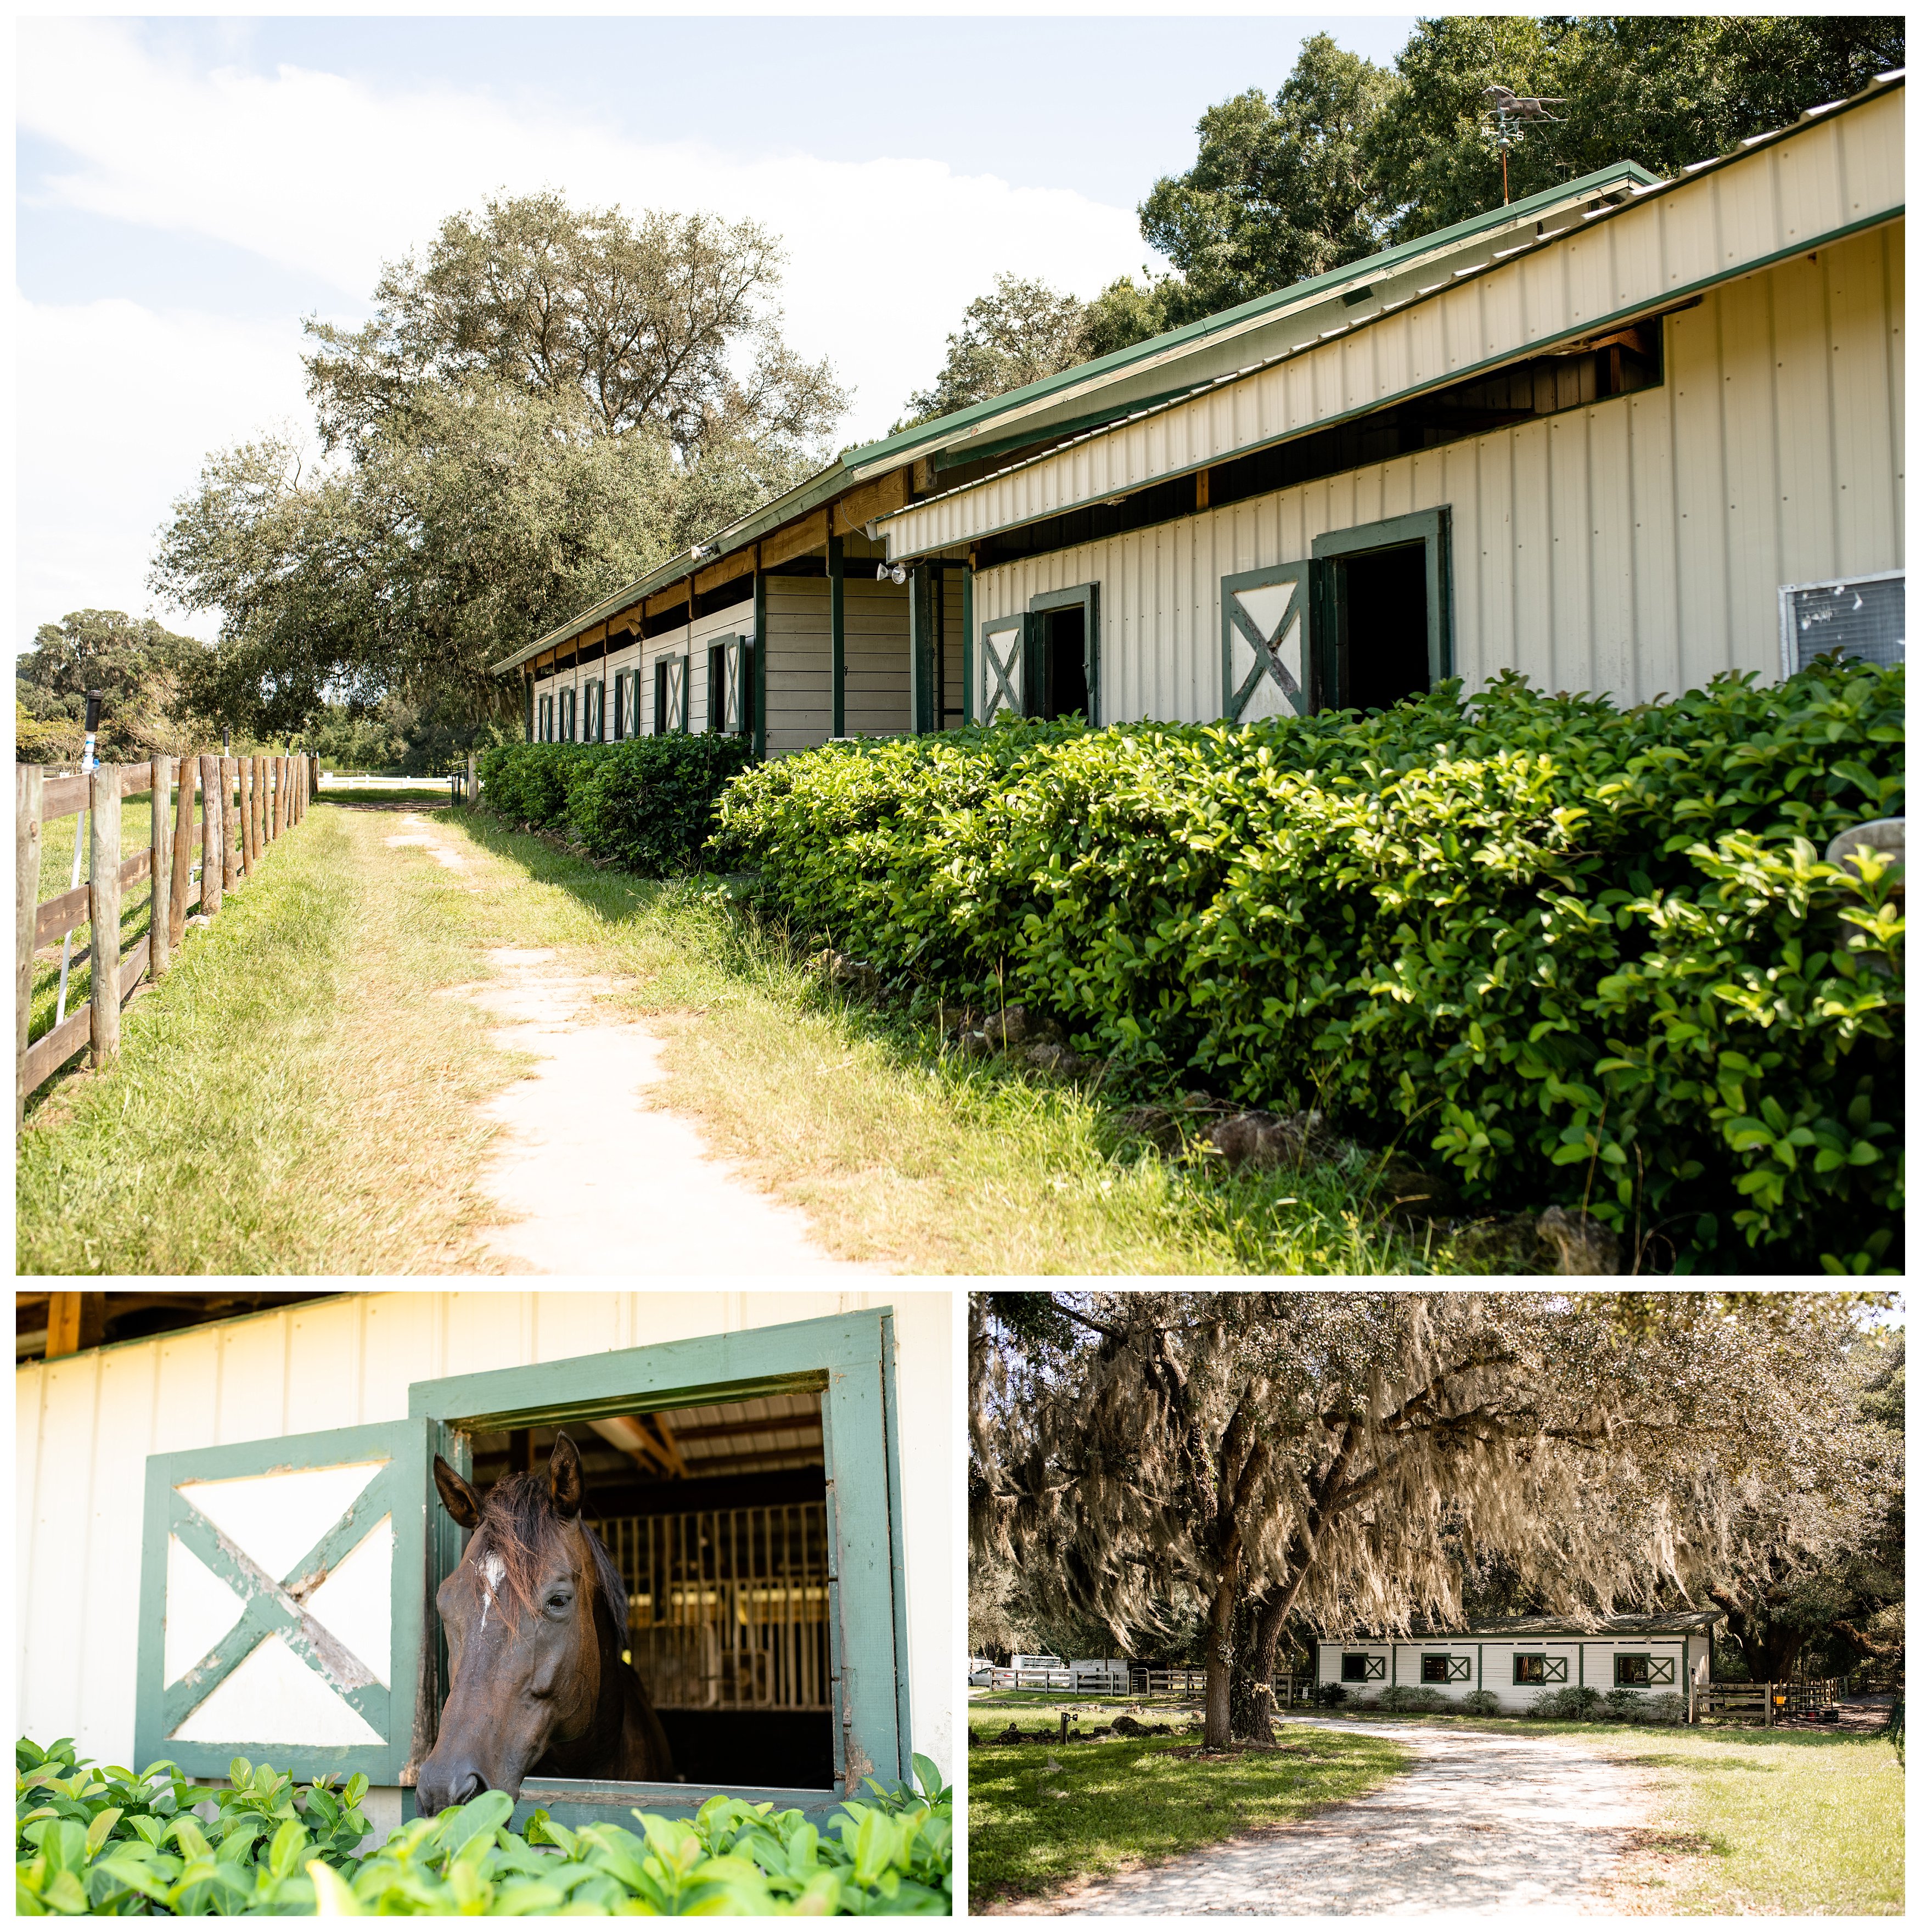 Run of Luck LLC is a horse training and lesson barn near Ocala offering lessons in all disciplines.